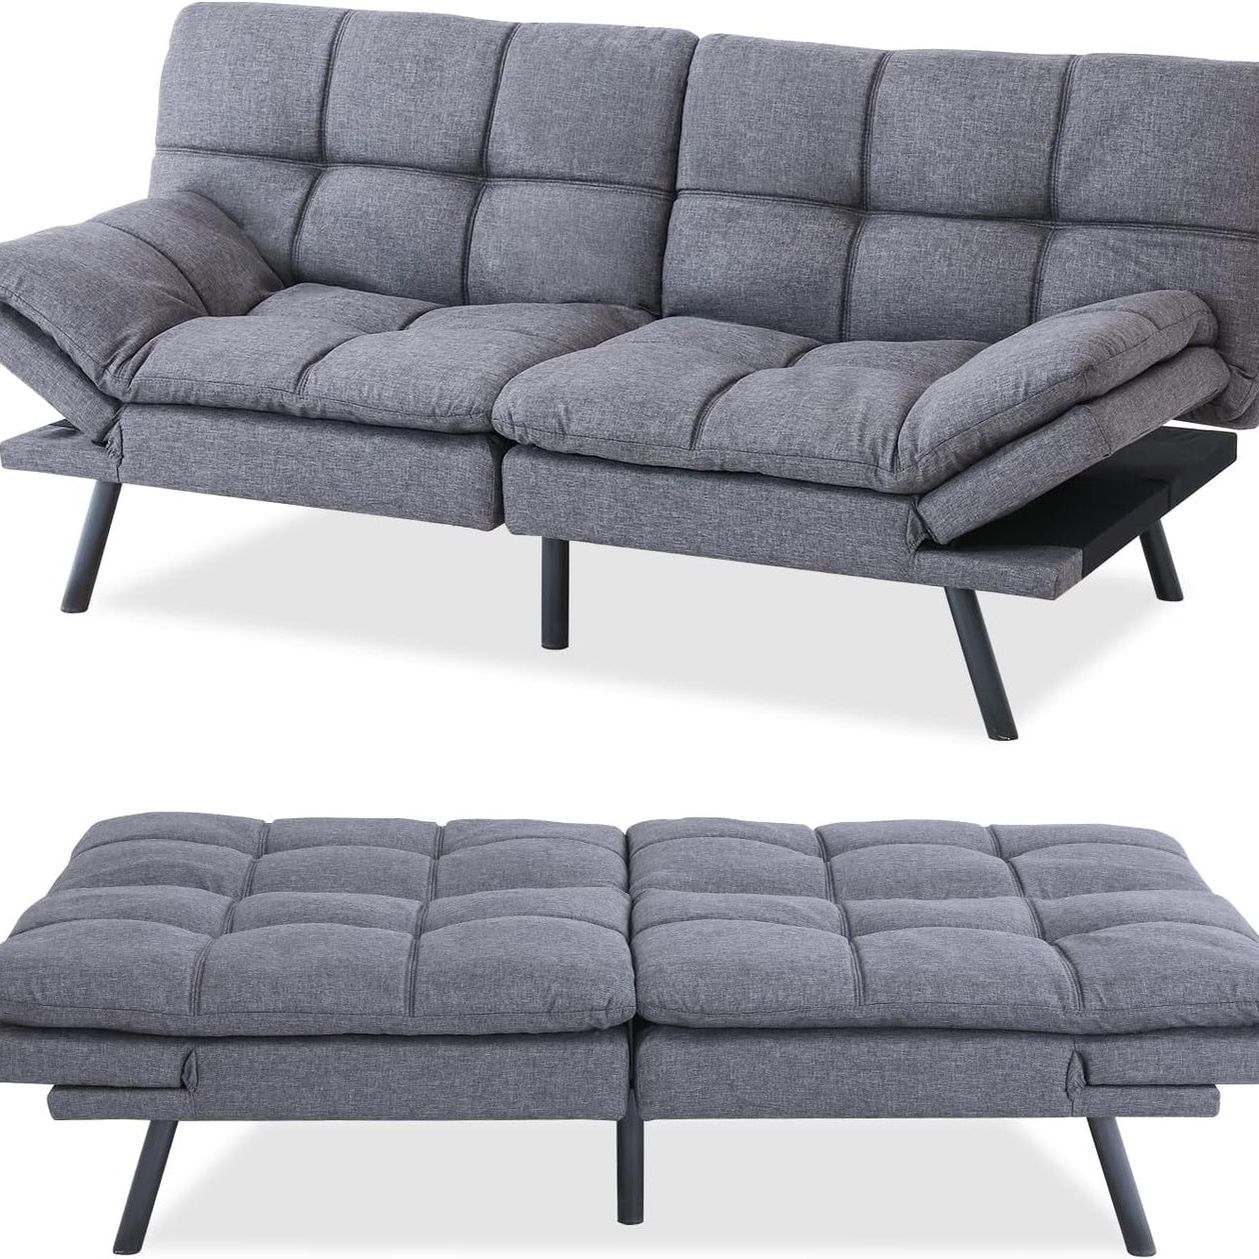 Hcore Convertible Sleeper, Memory Foam Futon Couch,Loveseat Bed,Small Splitback Modern Sofa Sofabed, Upgraded Grey - Retail $322 